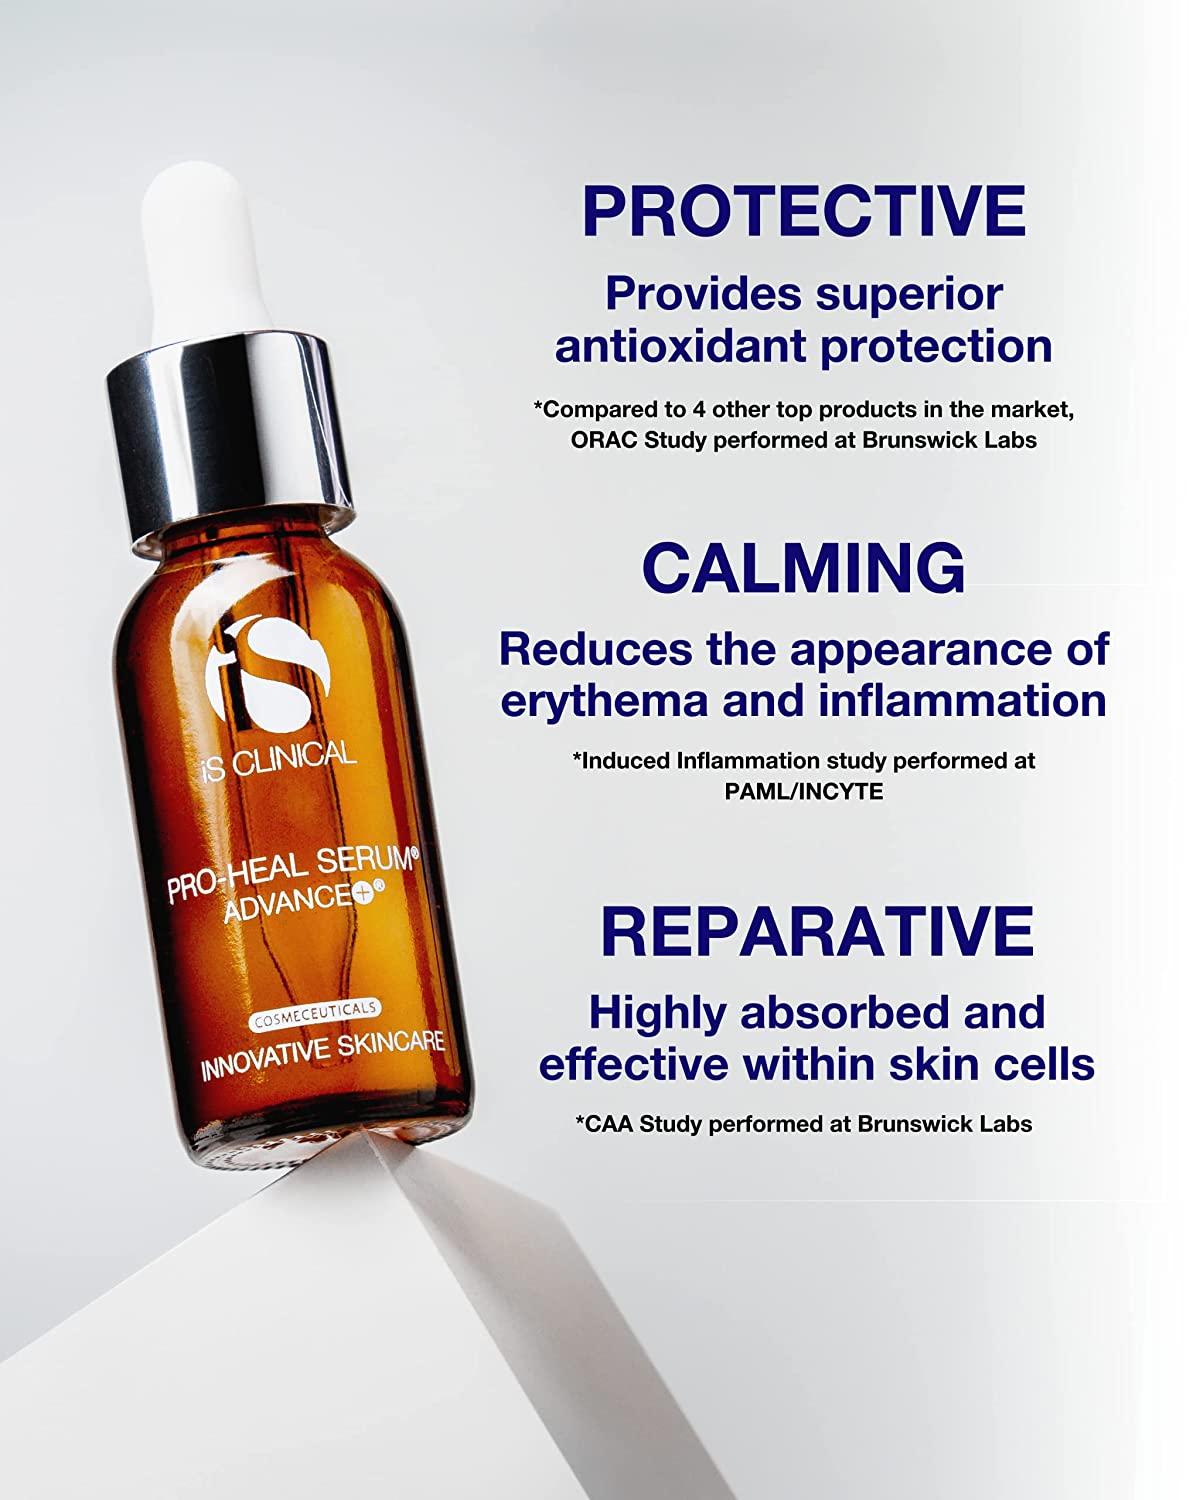 iS Clinical Pro Heal Serum